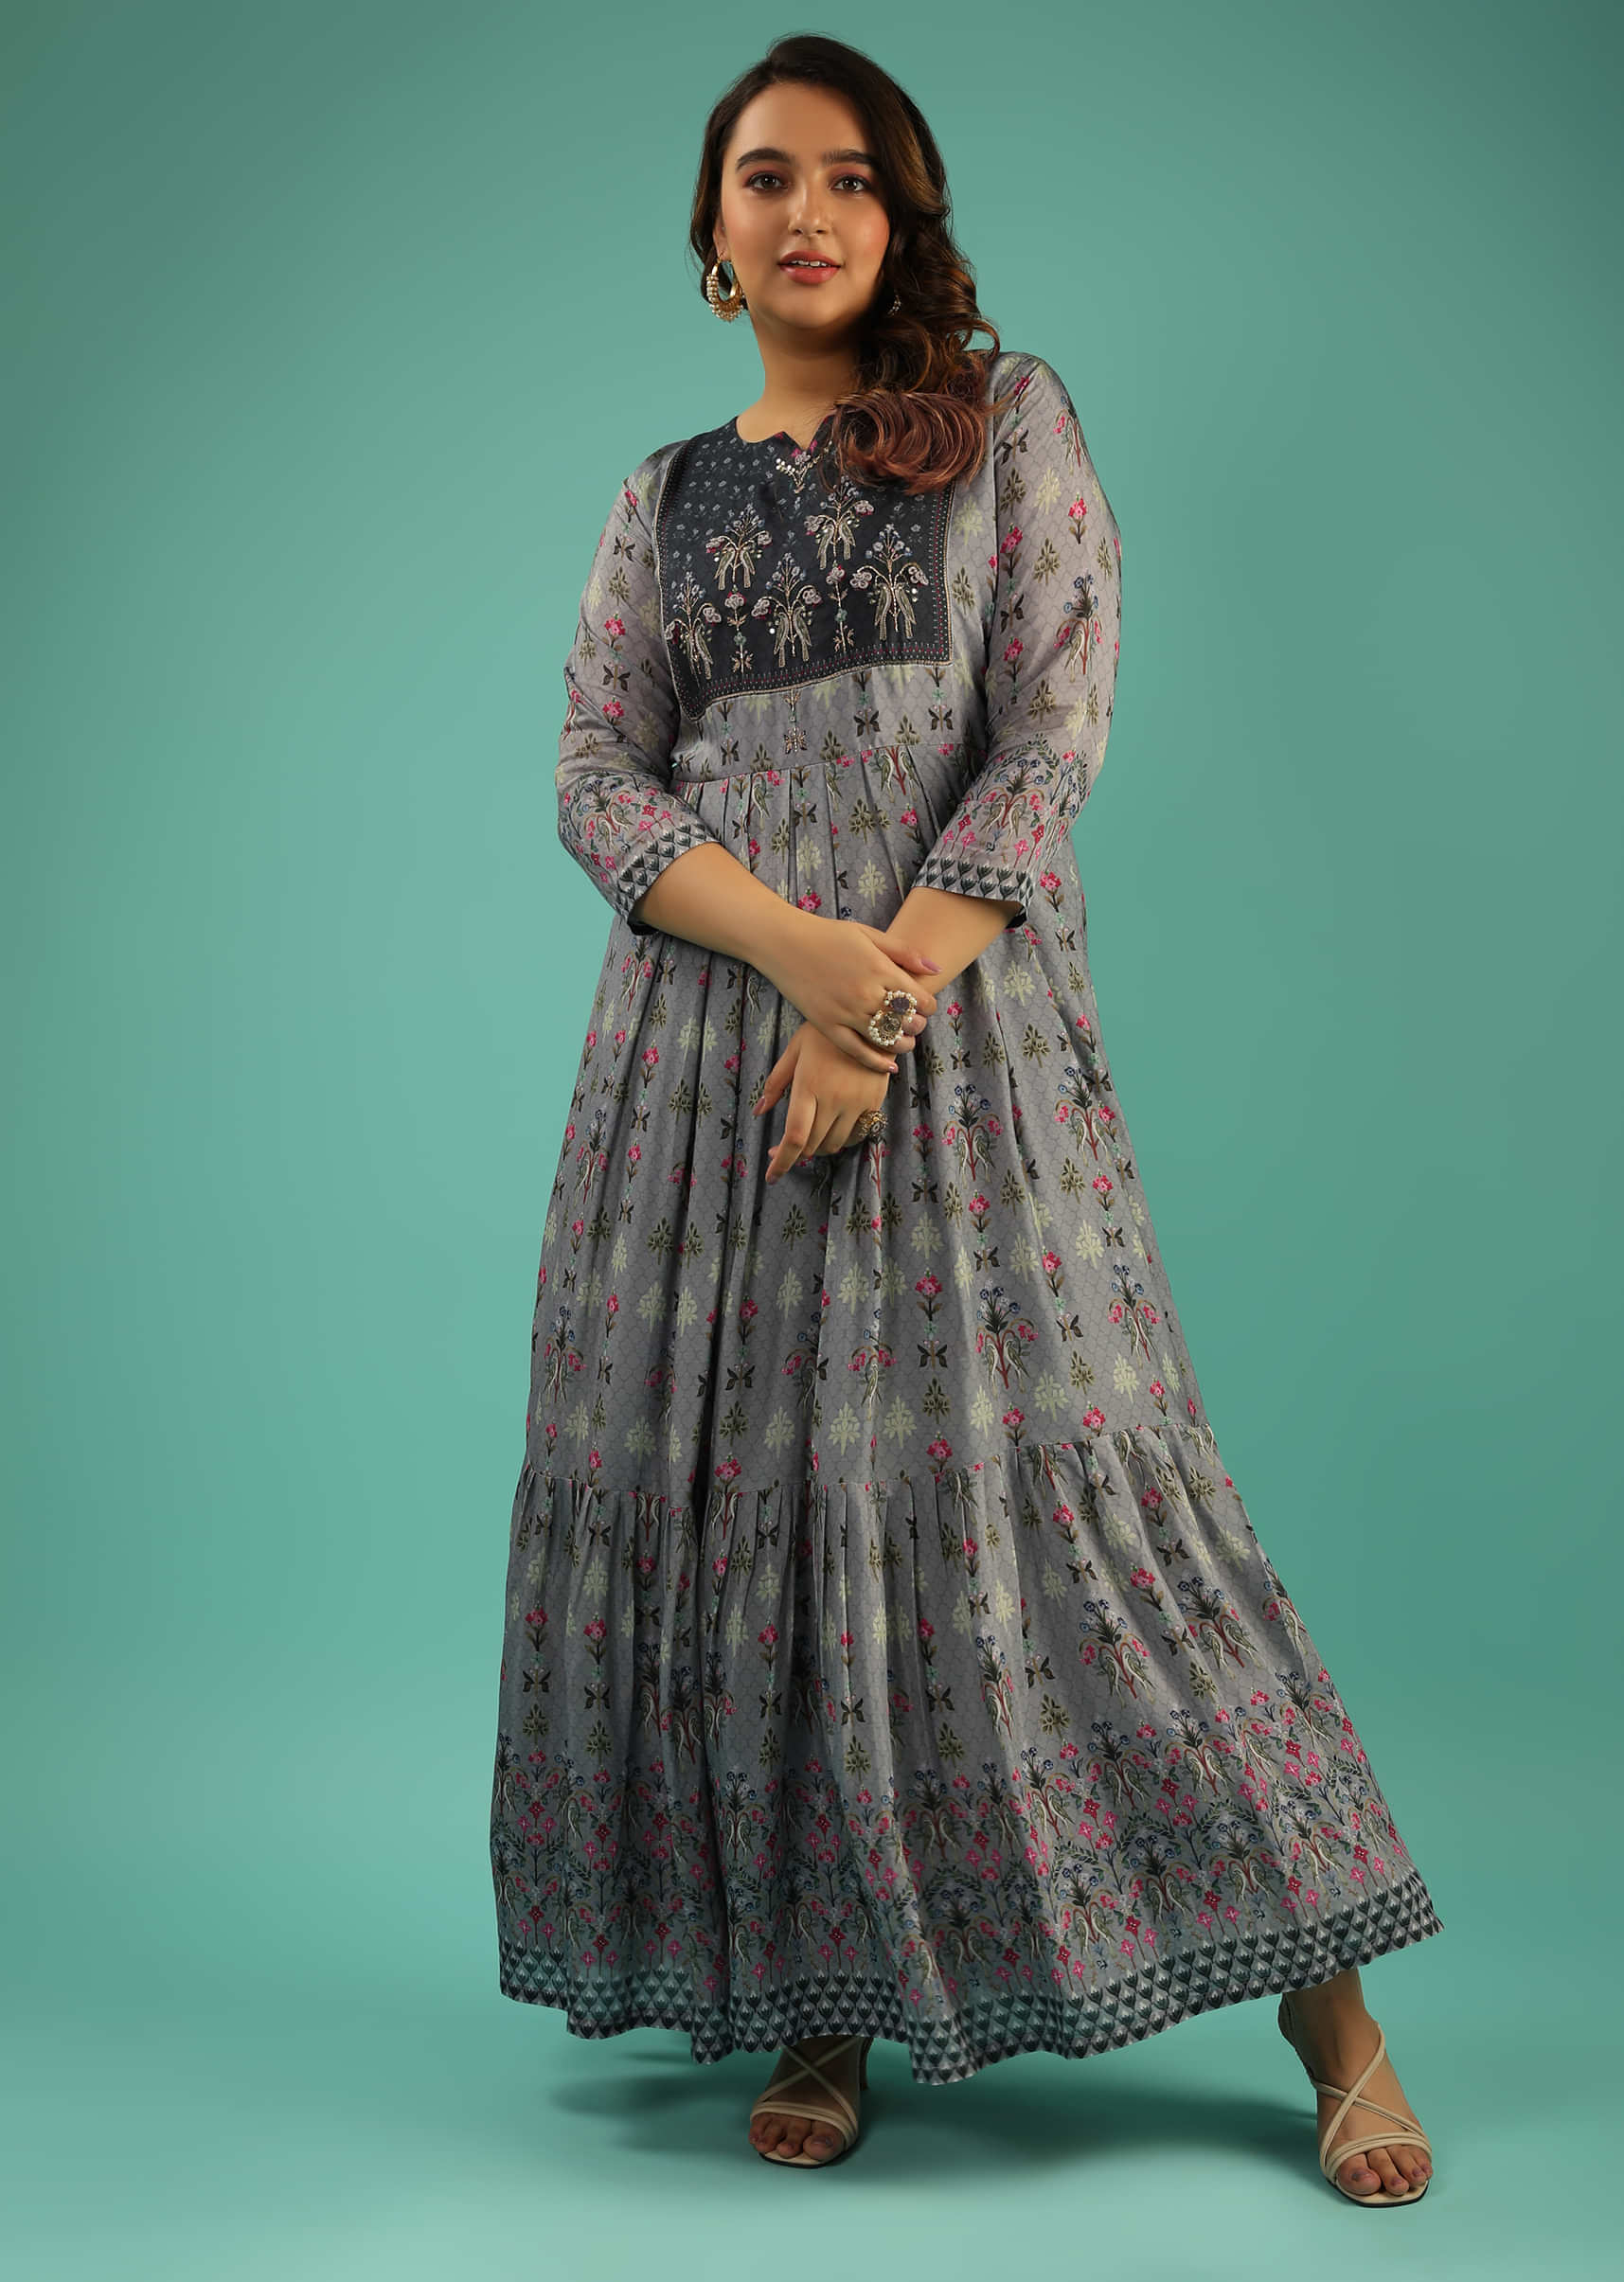 Cloud Grey Cotton Silk Tunic With Printed Floral And Bird Motifs Along With Embroidered Bodice